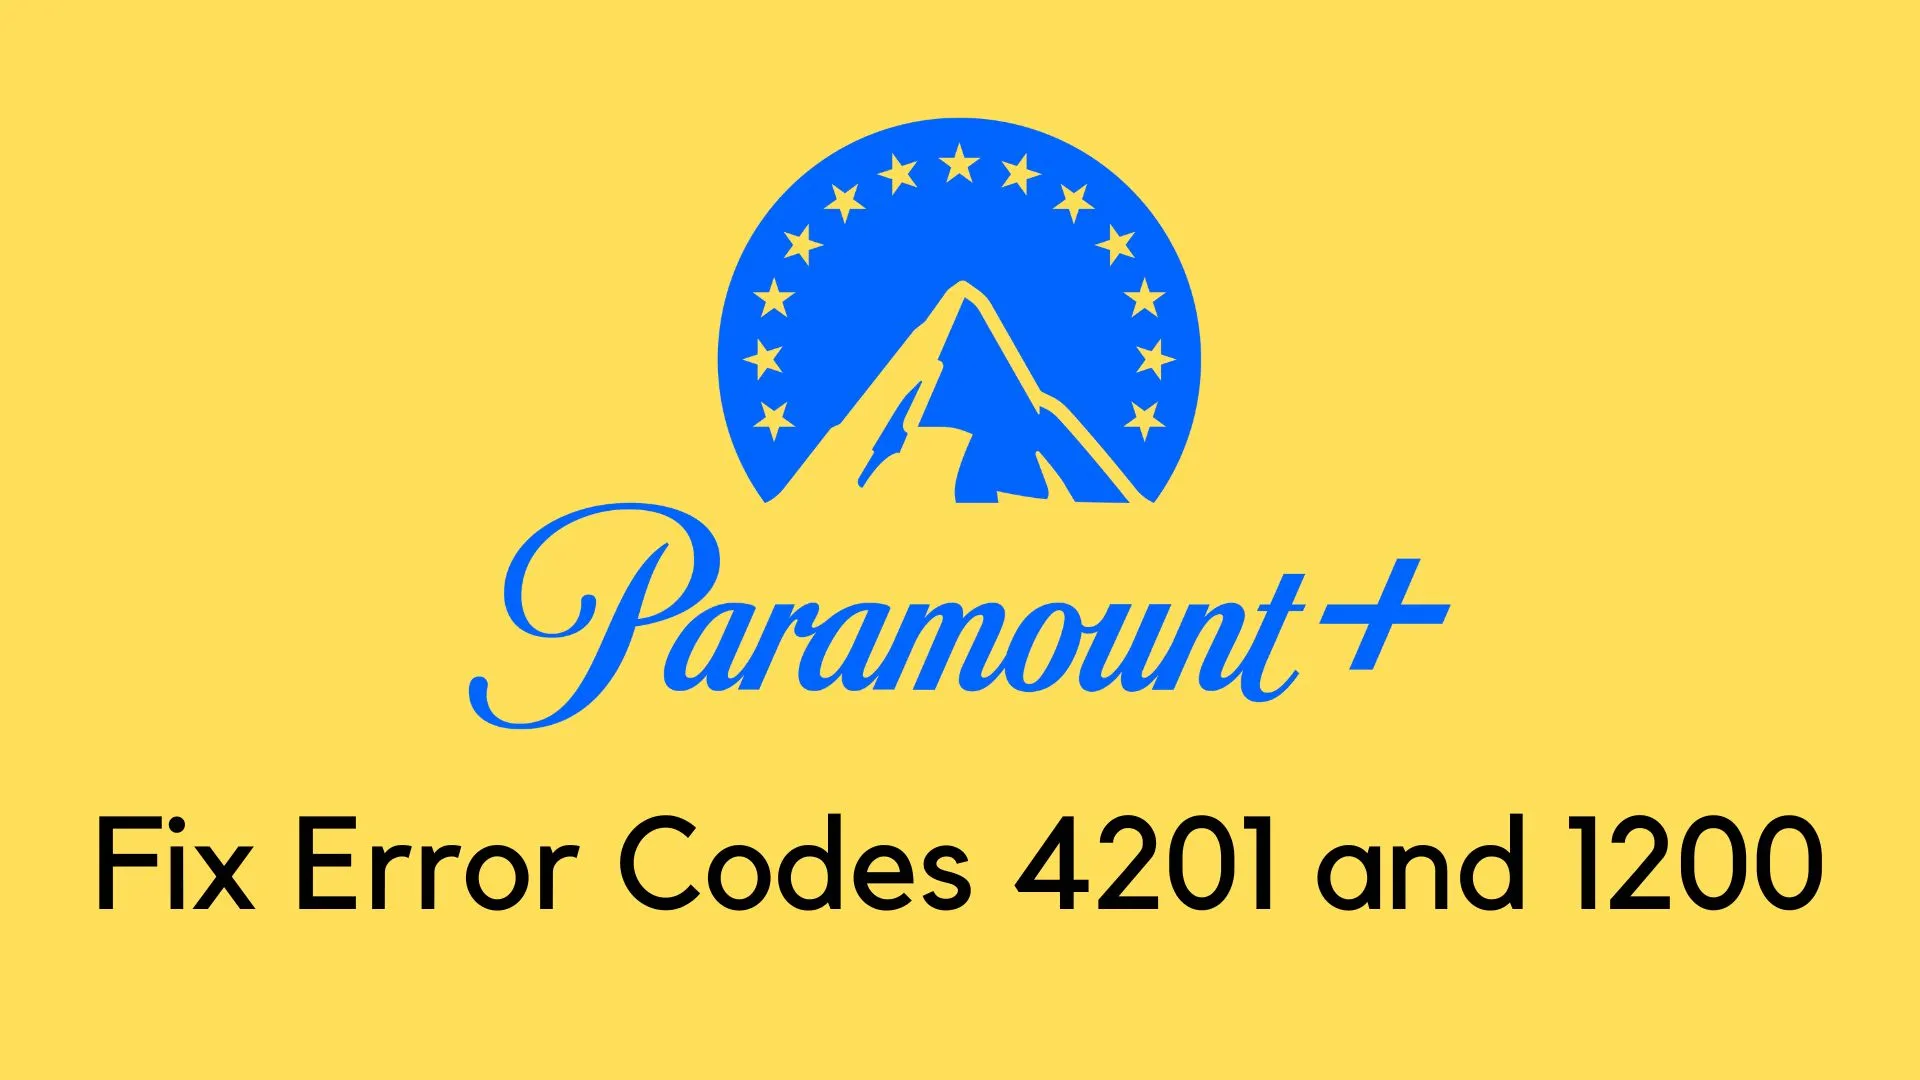 How to Fix Paramount Plus Error Codes 4201 and 1200?